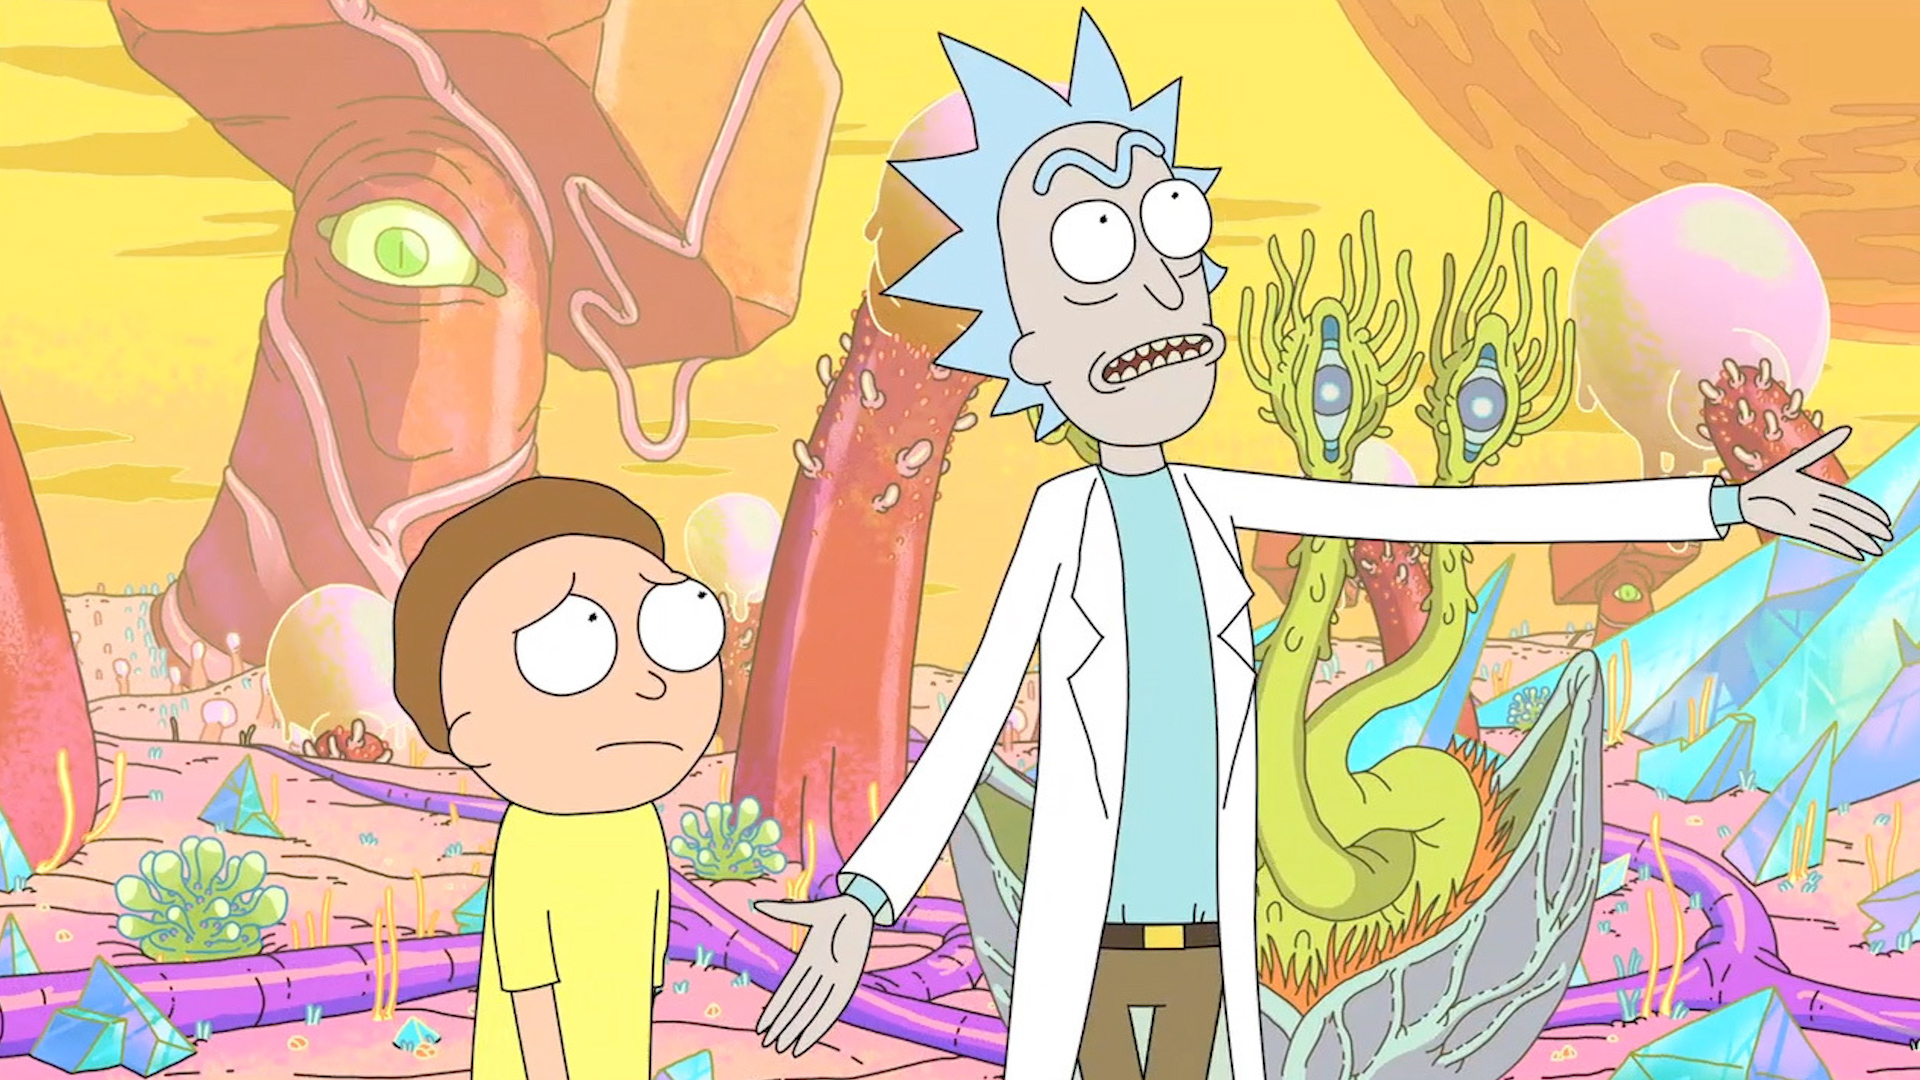 Rick Sanchez along with his grandson Morty Smith in Rick and Morty (2013-).